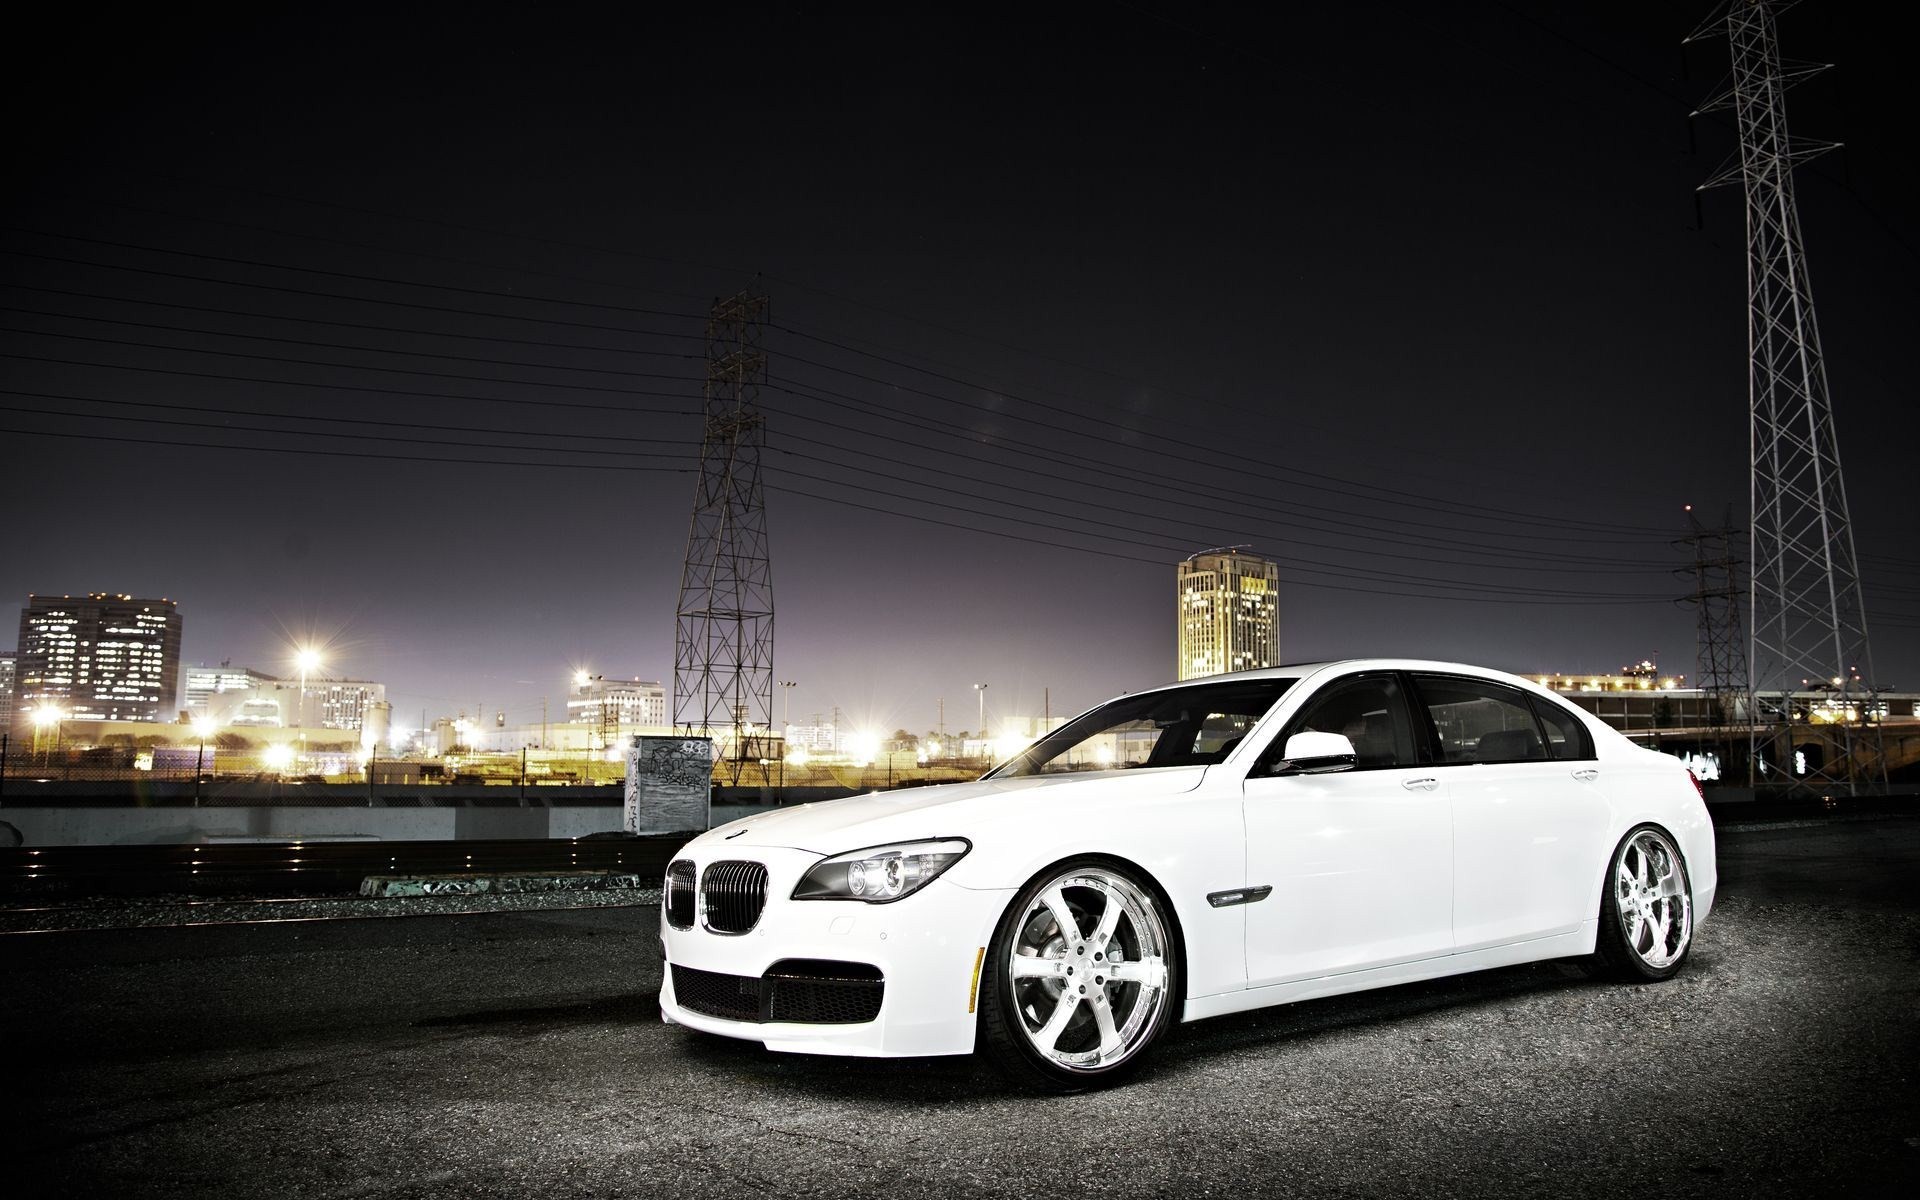 1920x1200 Bmw 7 Series Images (841248706) Free Download by Shanelle Olivier